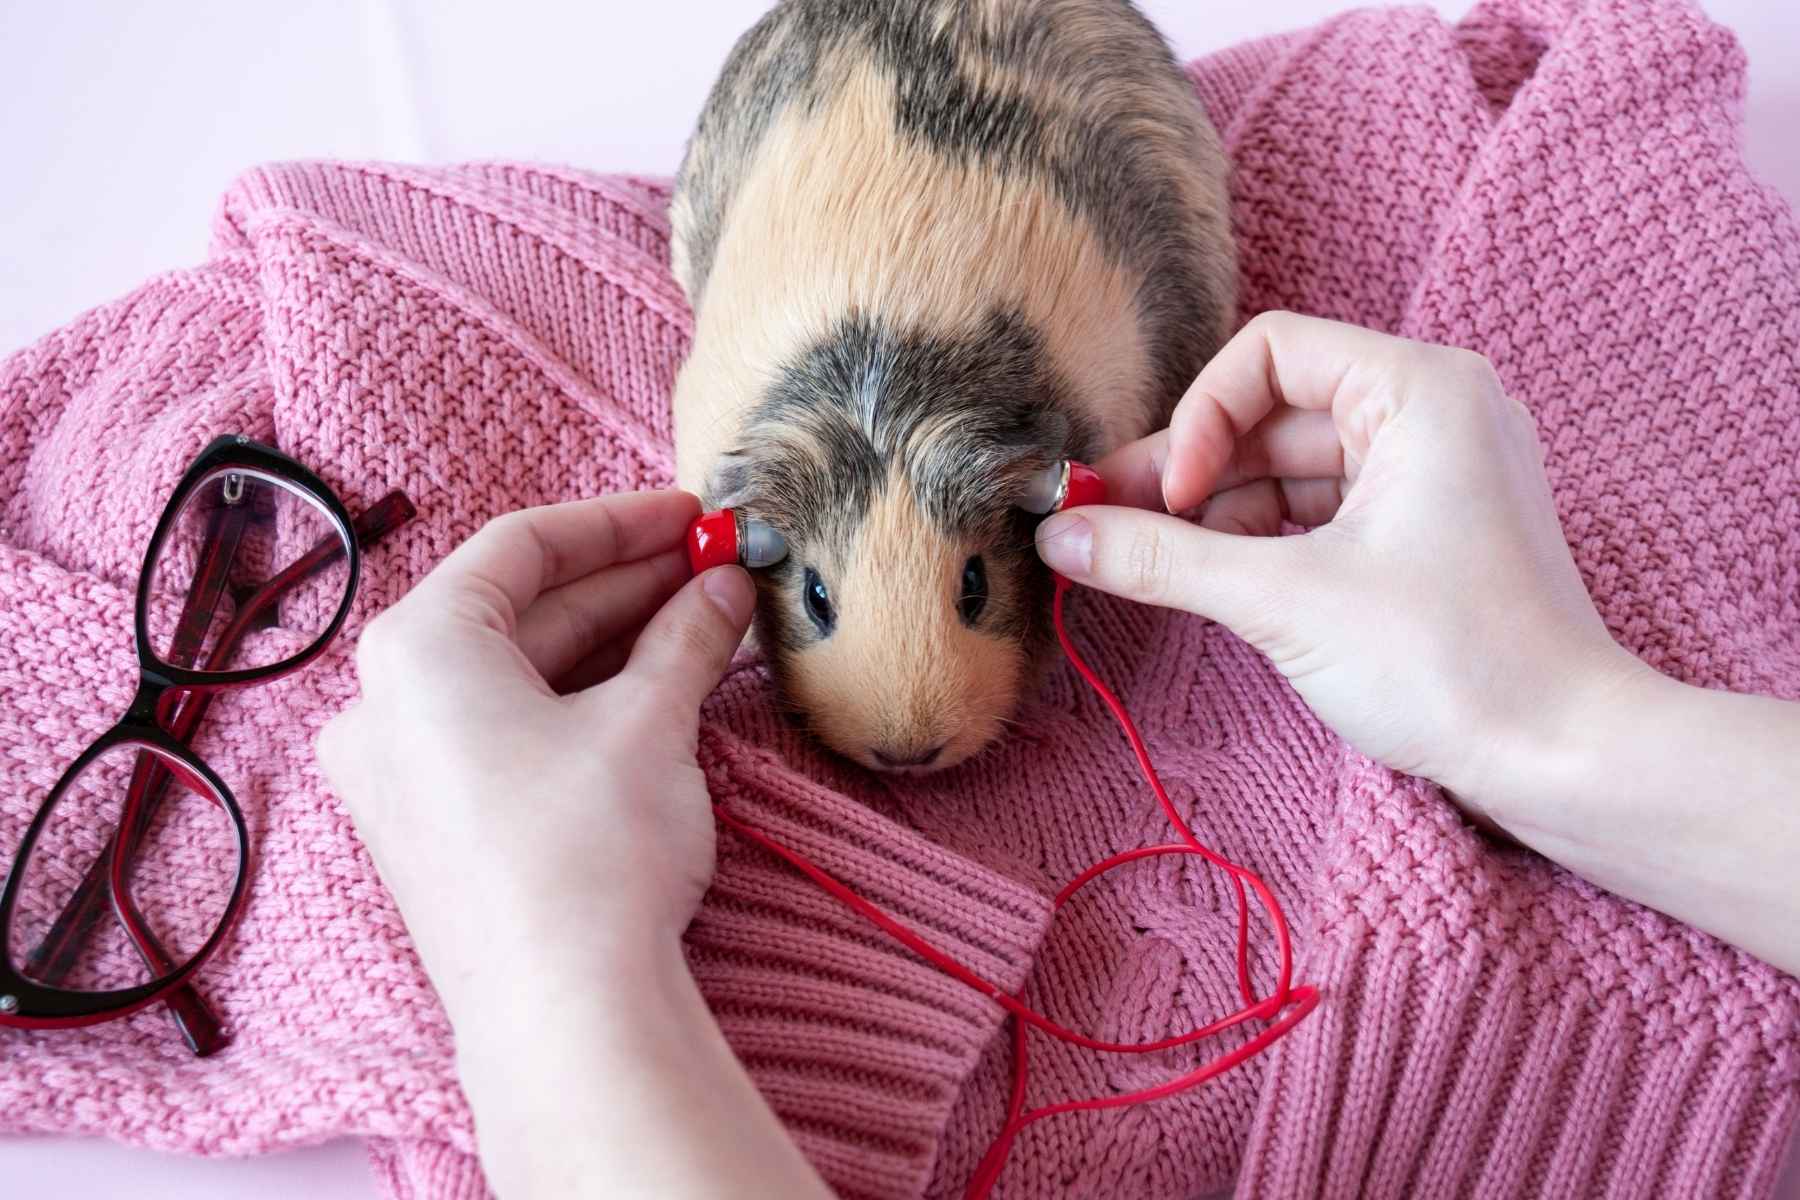 Woman plugging airpods in guinea pig's ears